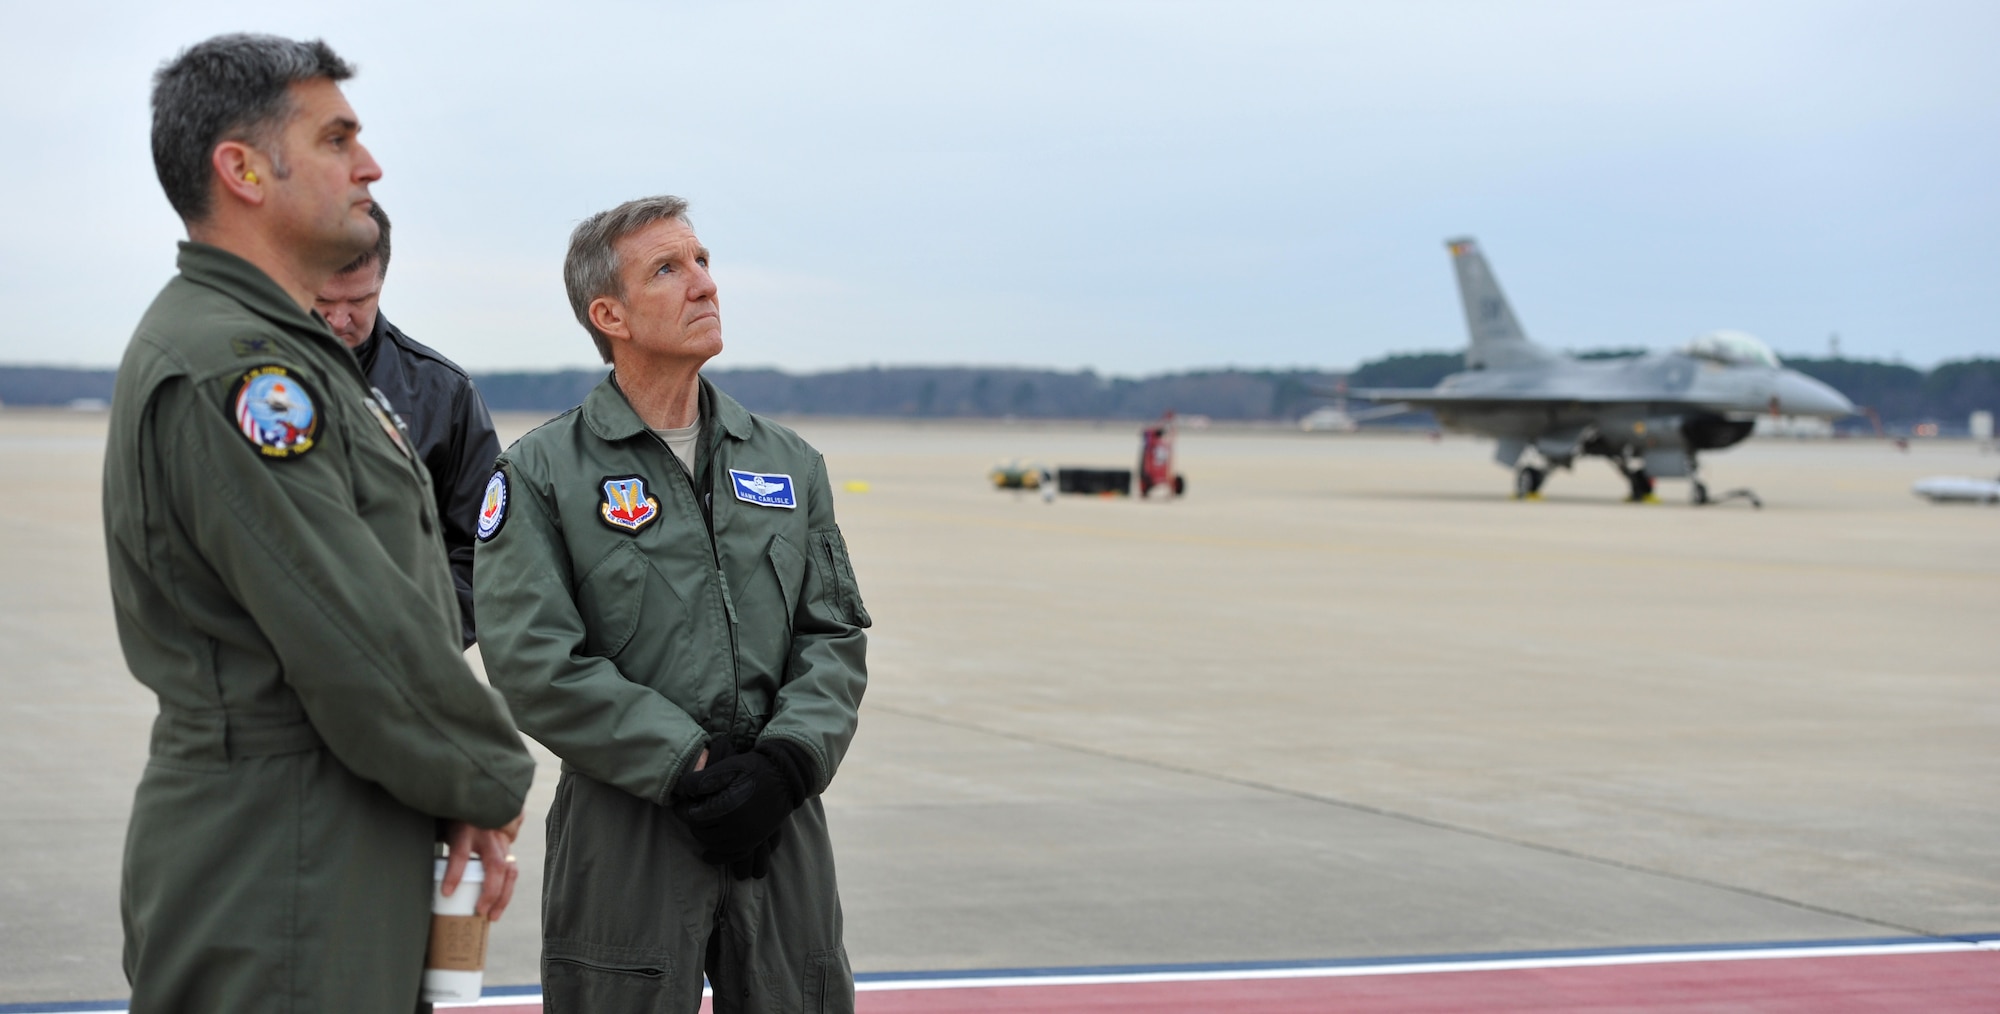 Gen. Hawk Carlisle (right), commander of Air Combat Command, watches alongside Col. Douglas Thies, 20th Operations Group commander and Maj. Gen. Thomas Deale, ACC A3, as Capt. John "Rain" Waters flies his F-16 Fighting Falcon in a demonstration in hopes of qualifying as a pilot for the 2017-18 F-16 demonstration team Feb. 1, 2017 at Langley Air Force Base, Va. Demonstration pilots, who perform at air shows worldwide, serve two-year tours on their respective teams, and must be certified at multiple levels. Carlisle, as COMACC, was Waters' final level of certification, and named him as a demo pilot immediatley after the flight. (U.S. Air Force photo by Emerald Ralston)